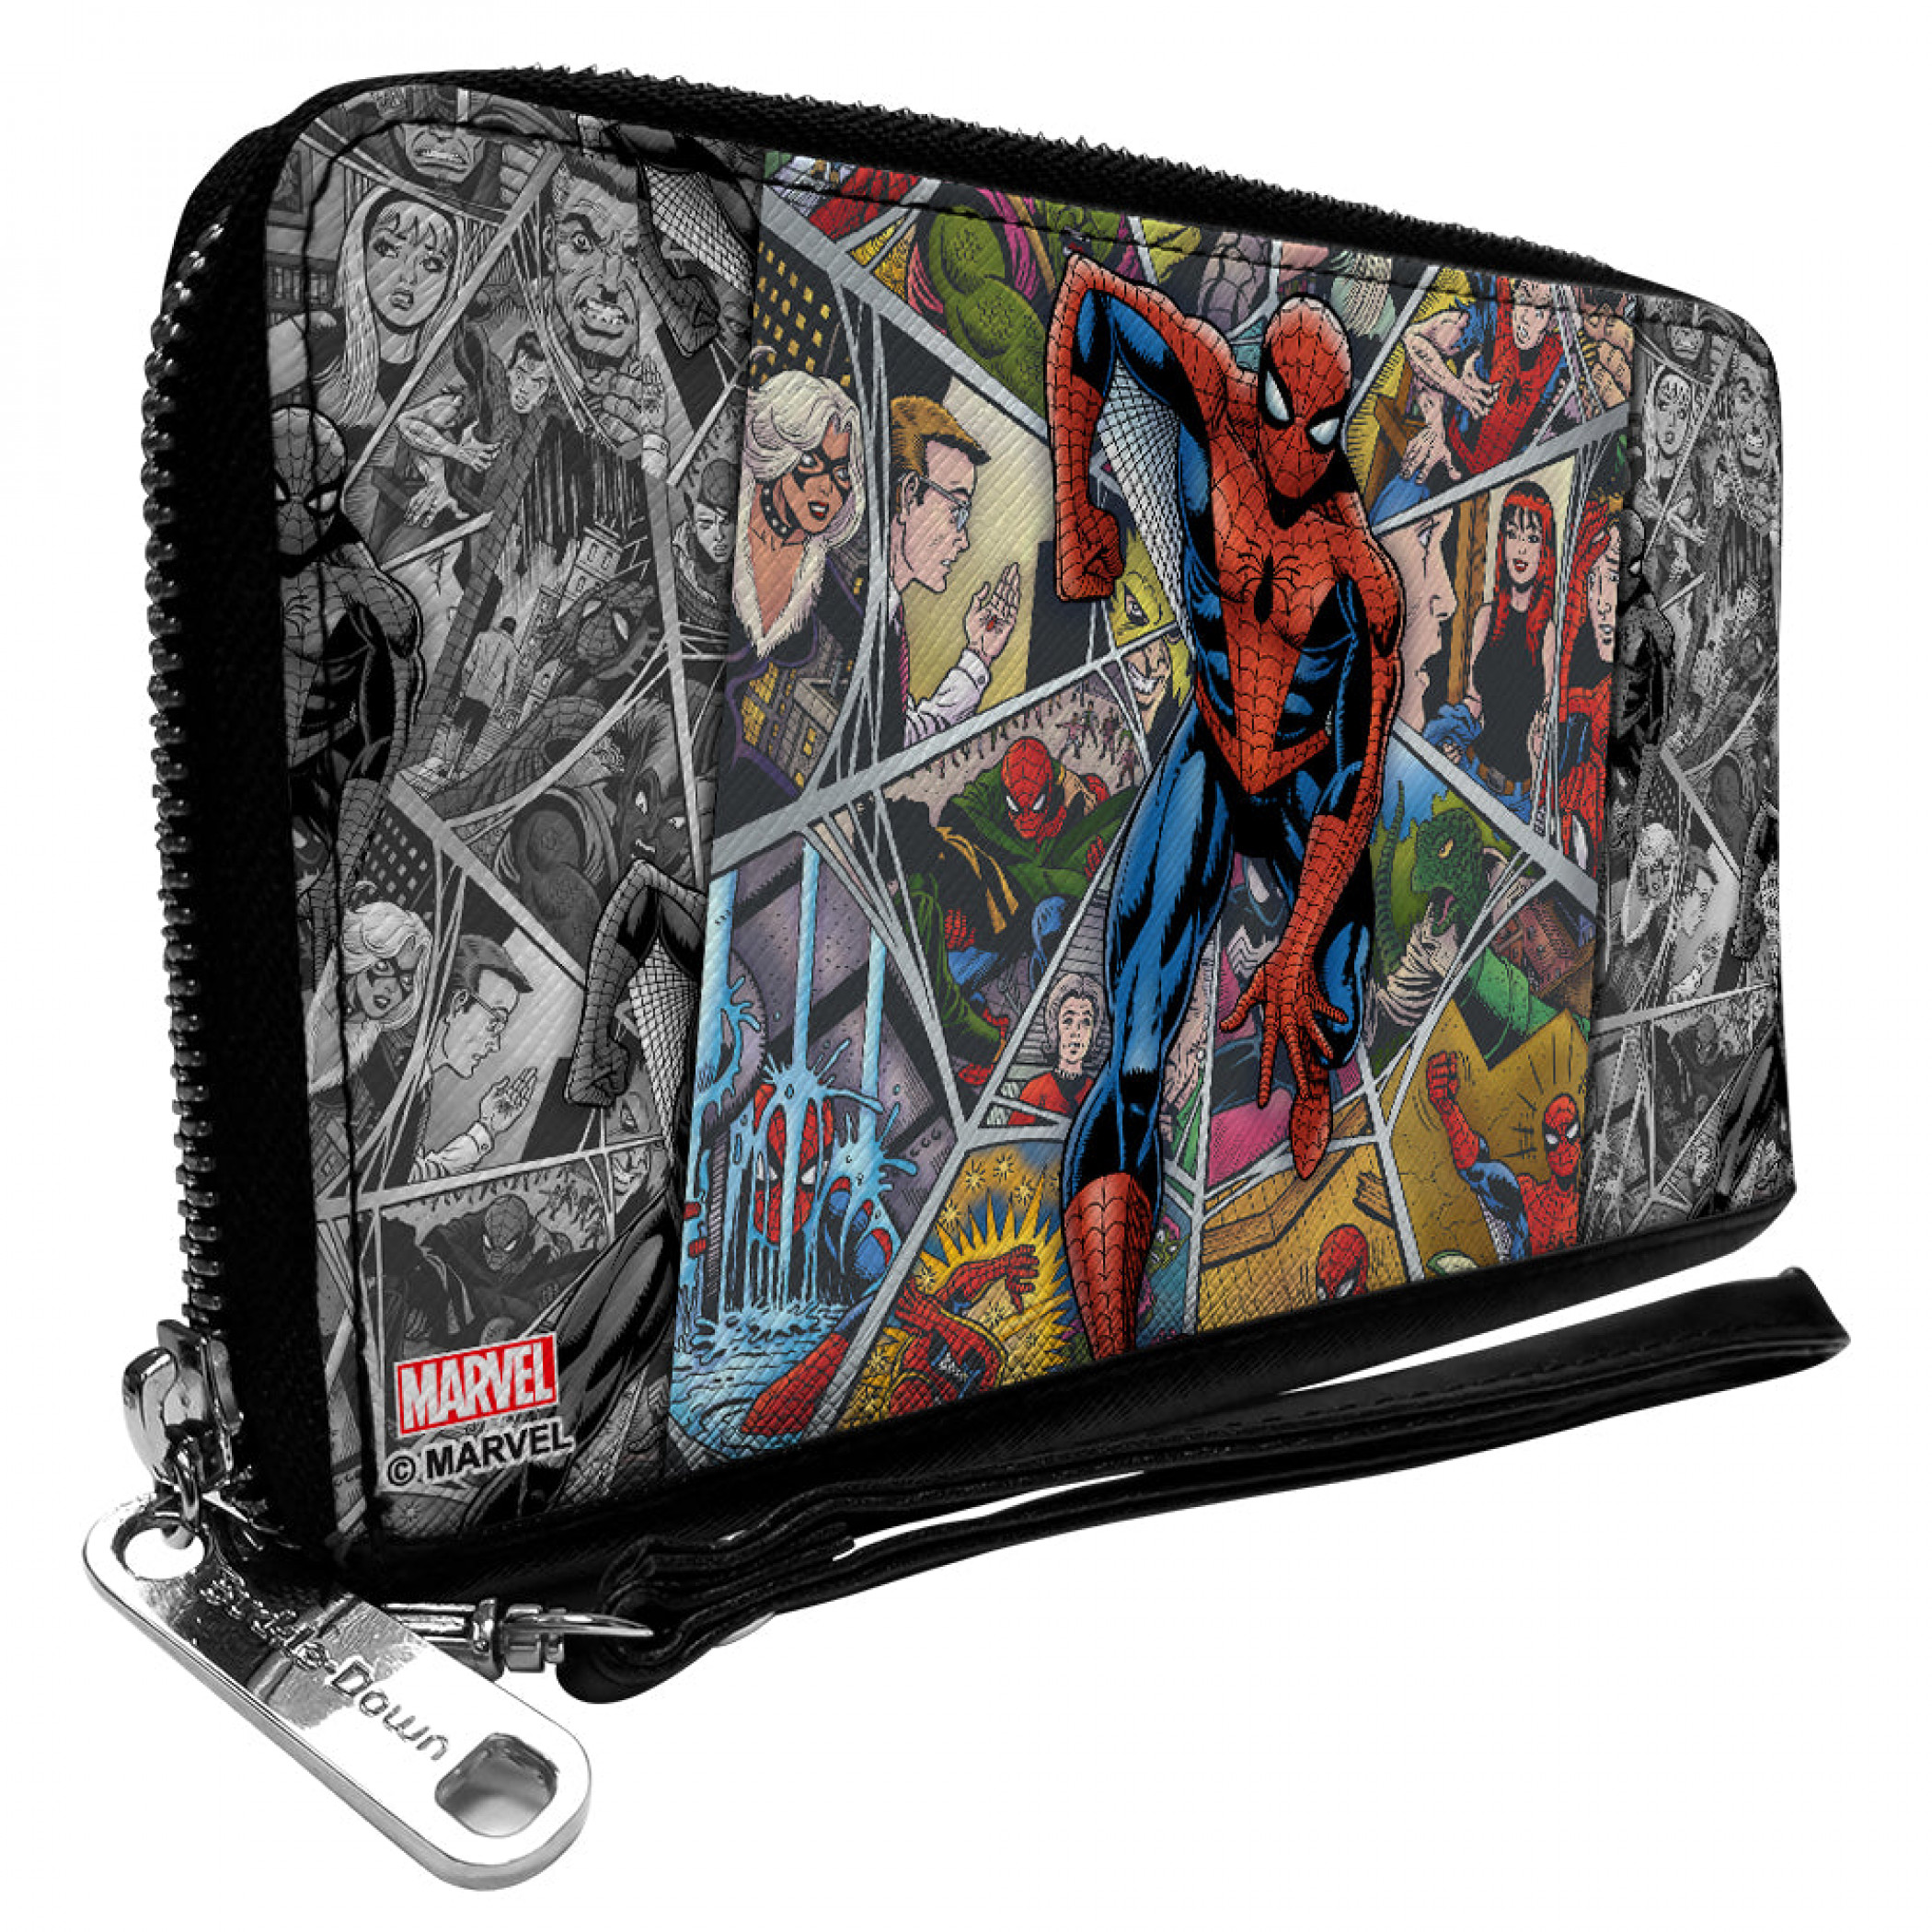 Spider-Man Character Panel Collage PU Leather Zip Around Wallet